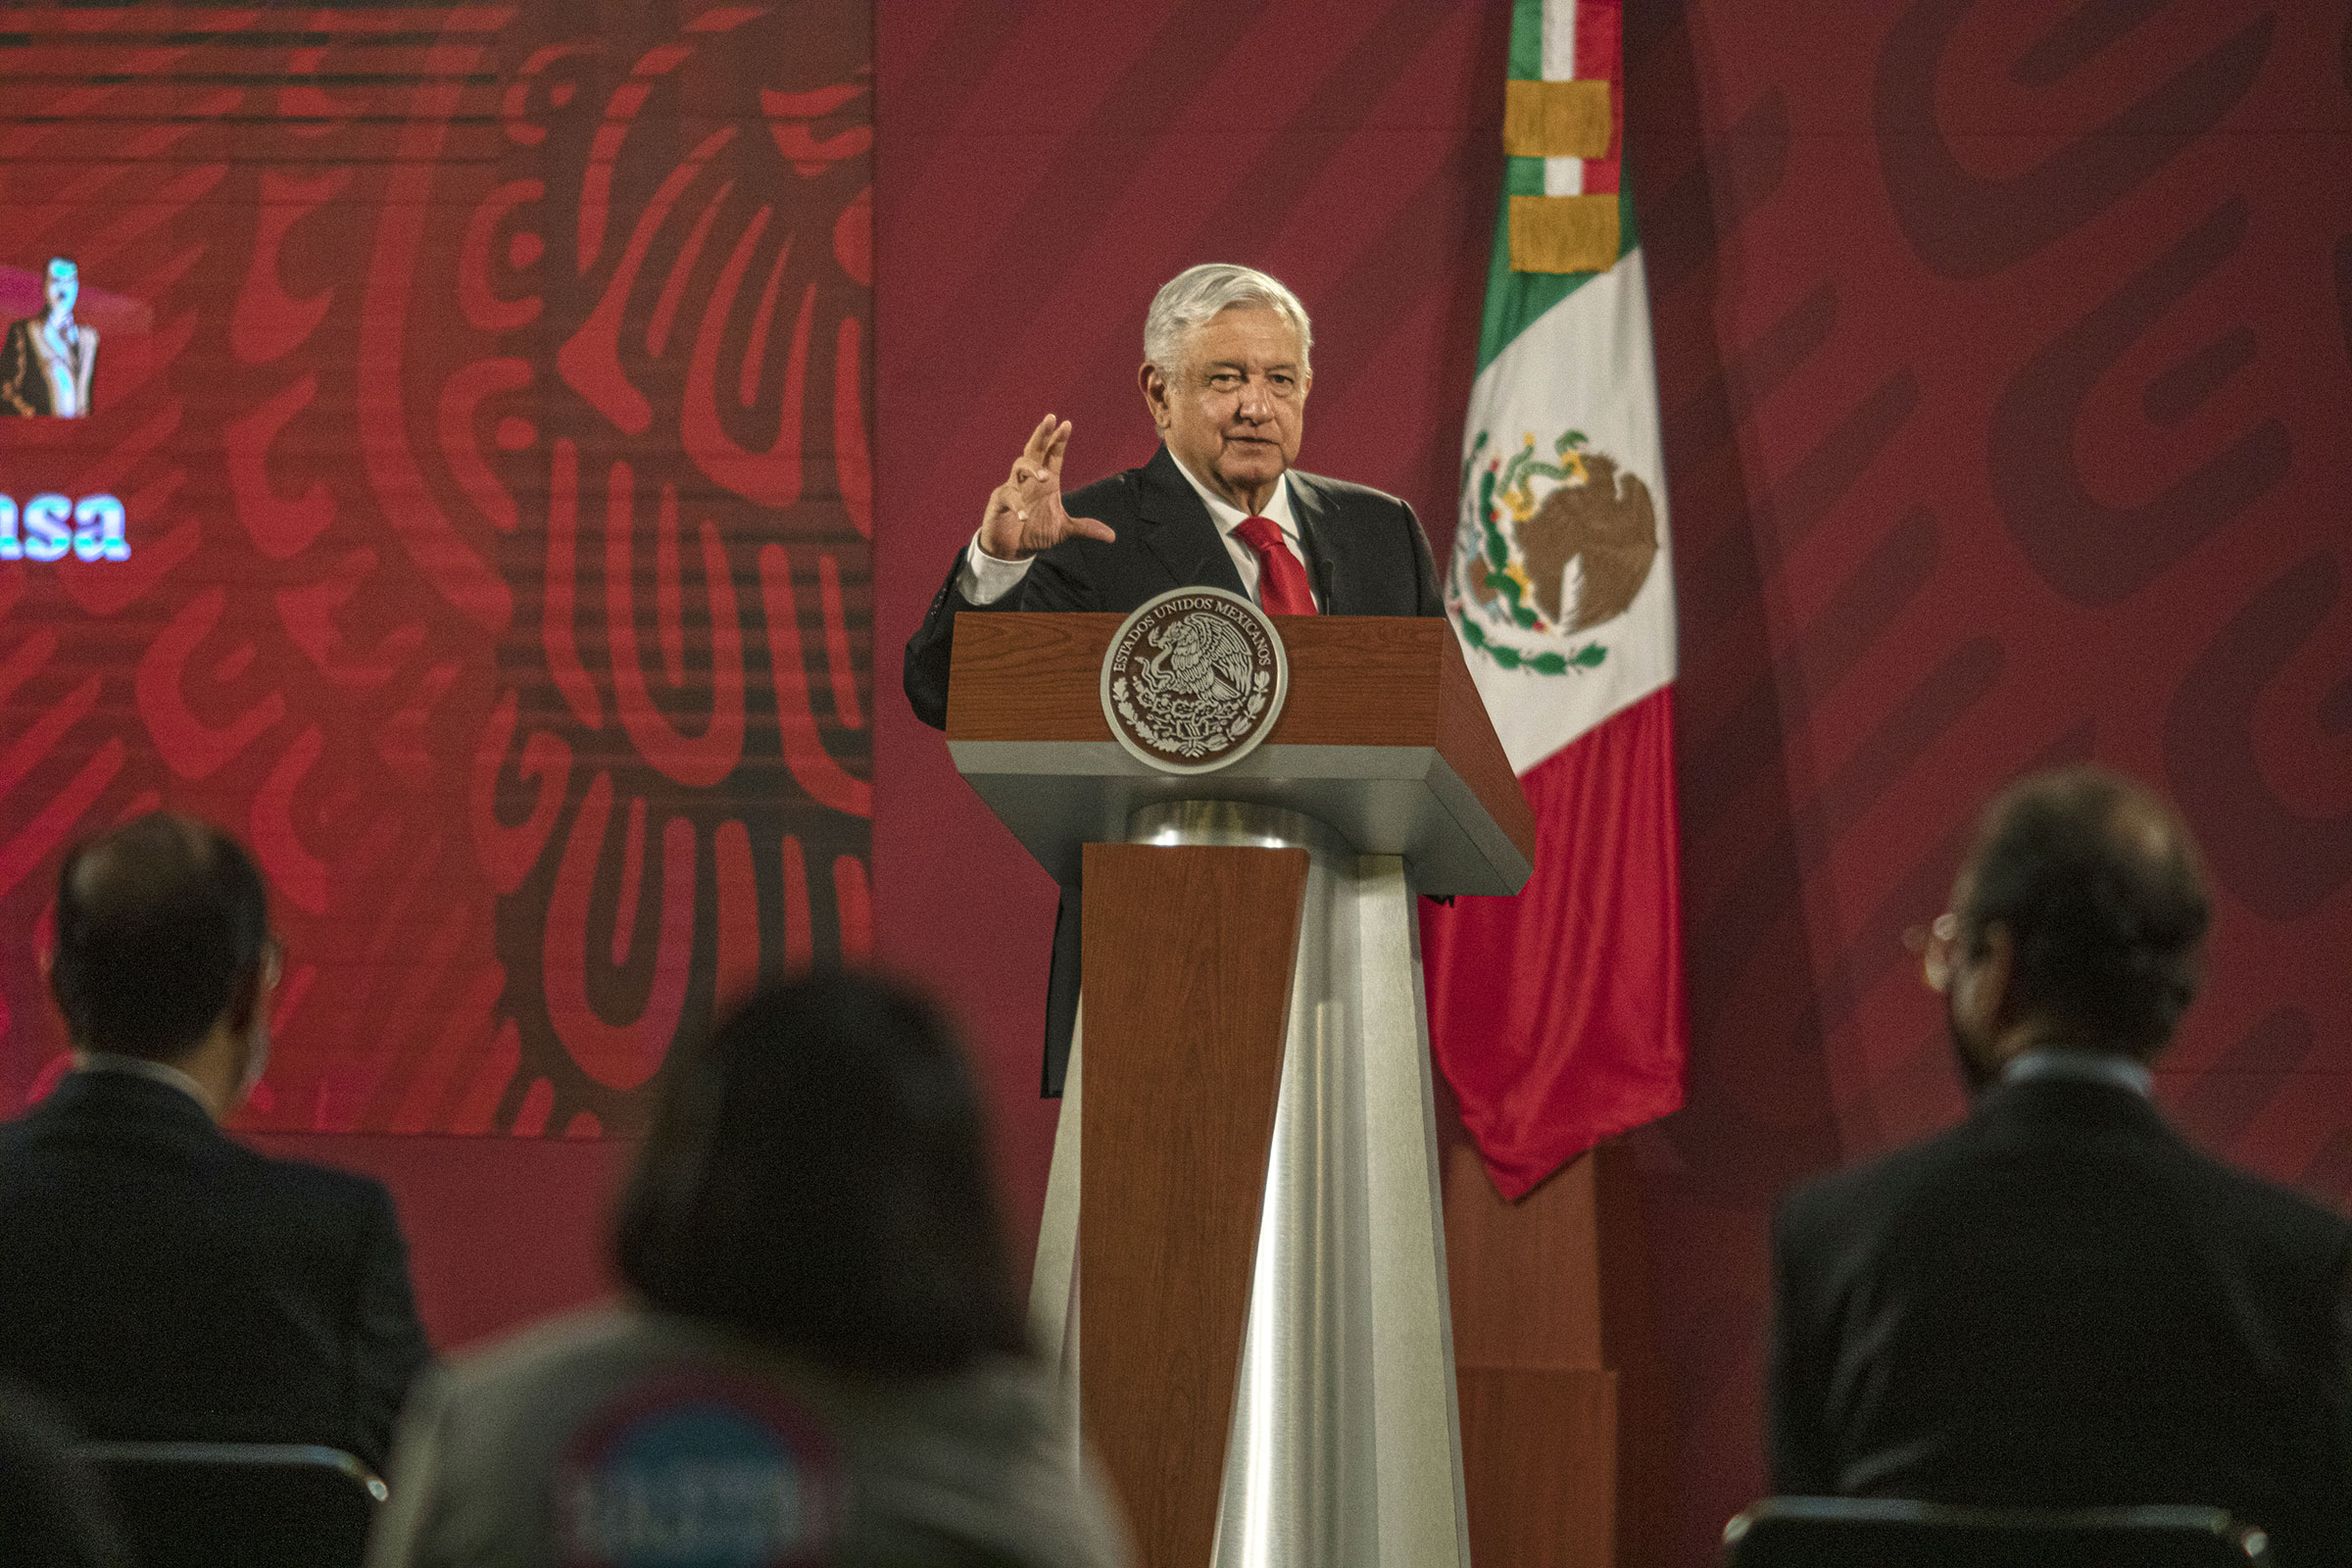 Andres Manuel Lopez Obrador, Mexico's president, speaks during a news conference at the National Palace in Mexico City, on July 22, 2020.